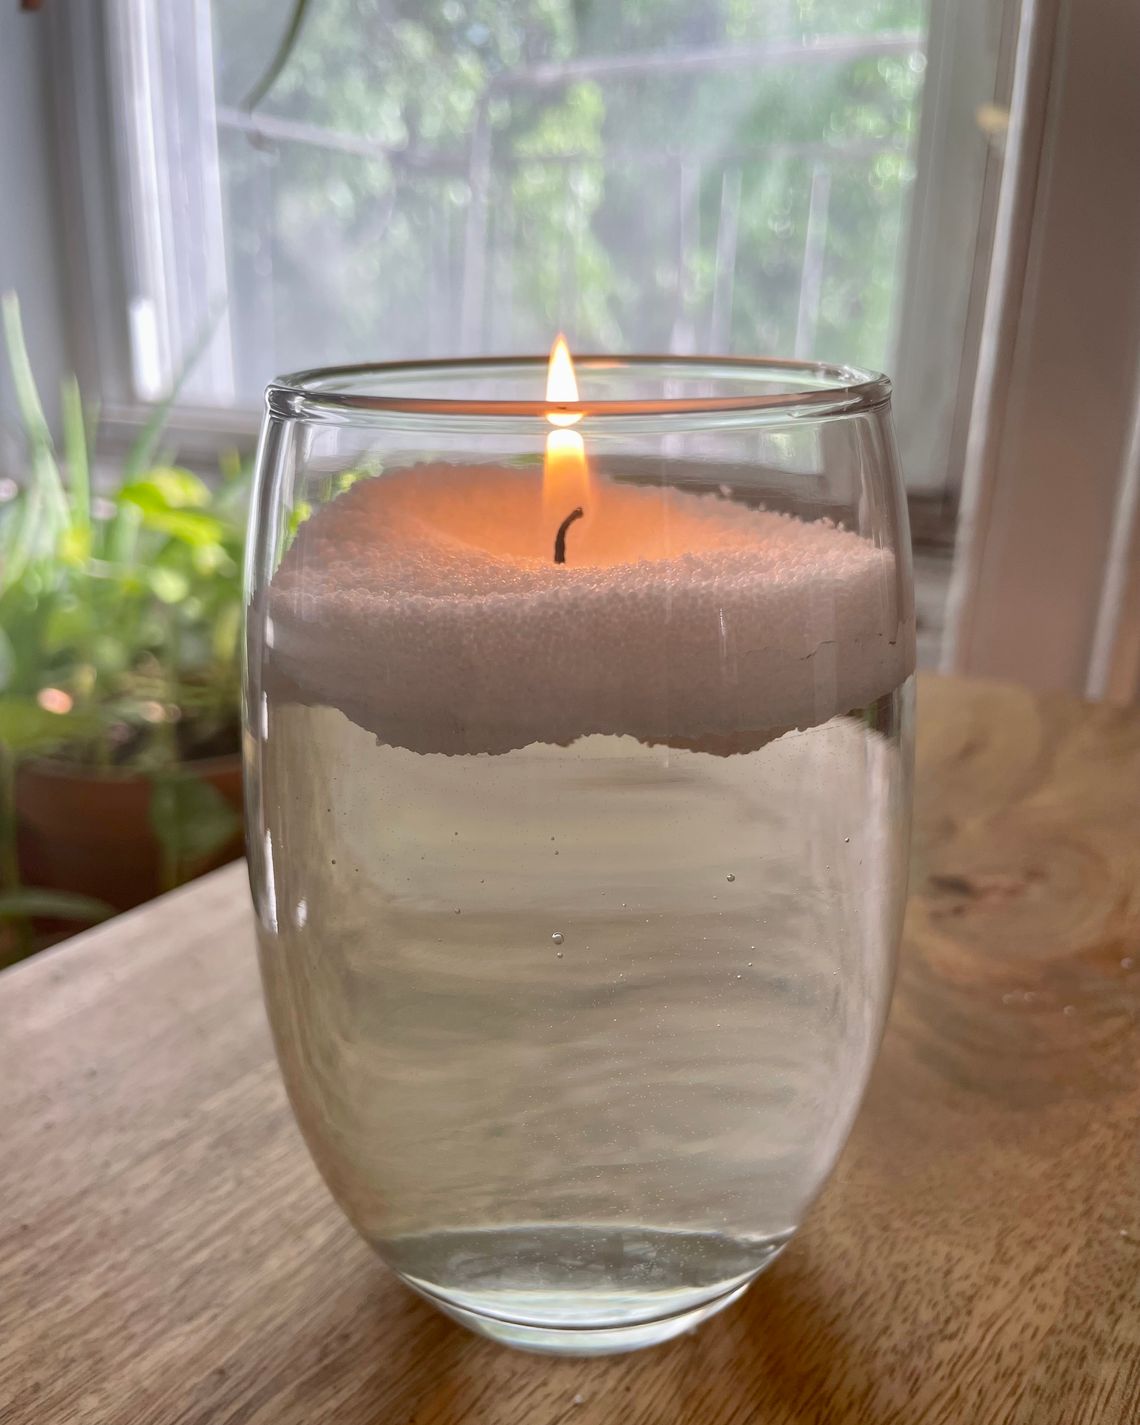 Pearled Candle